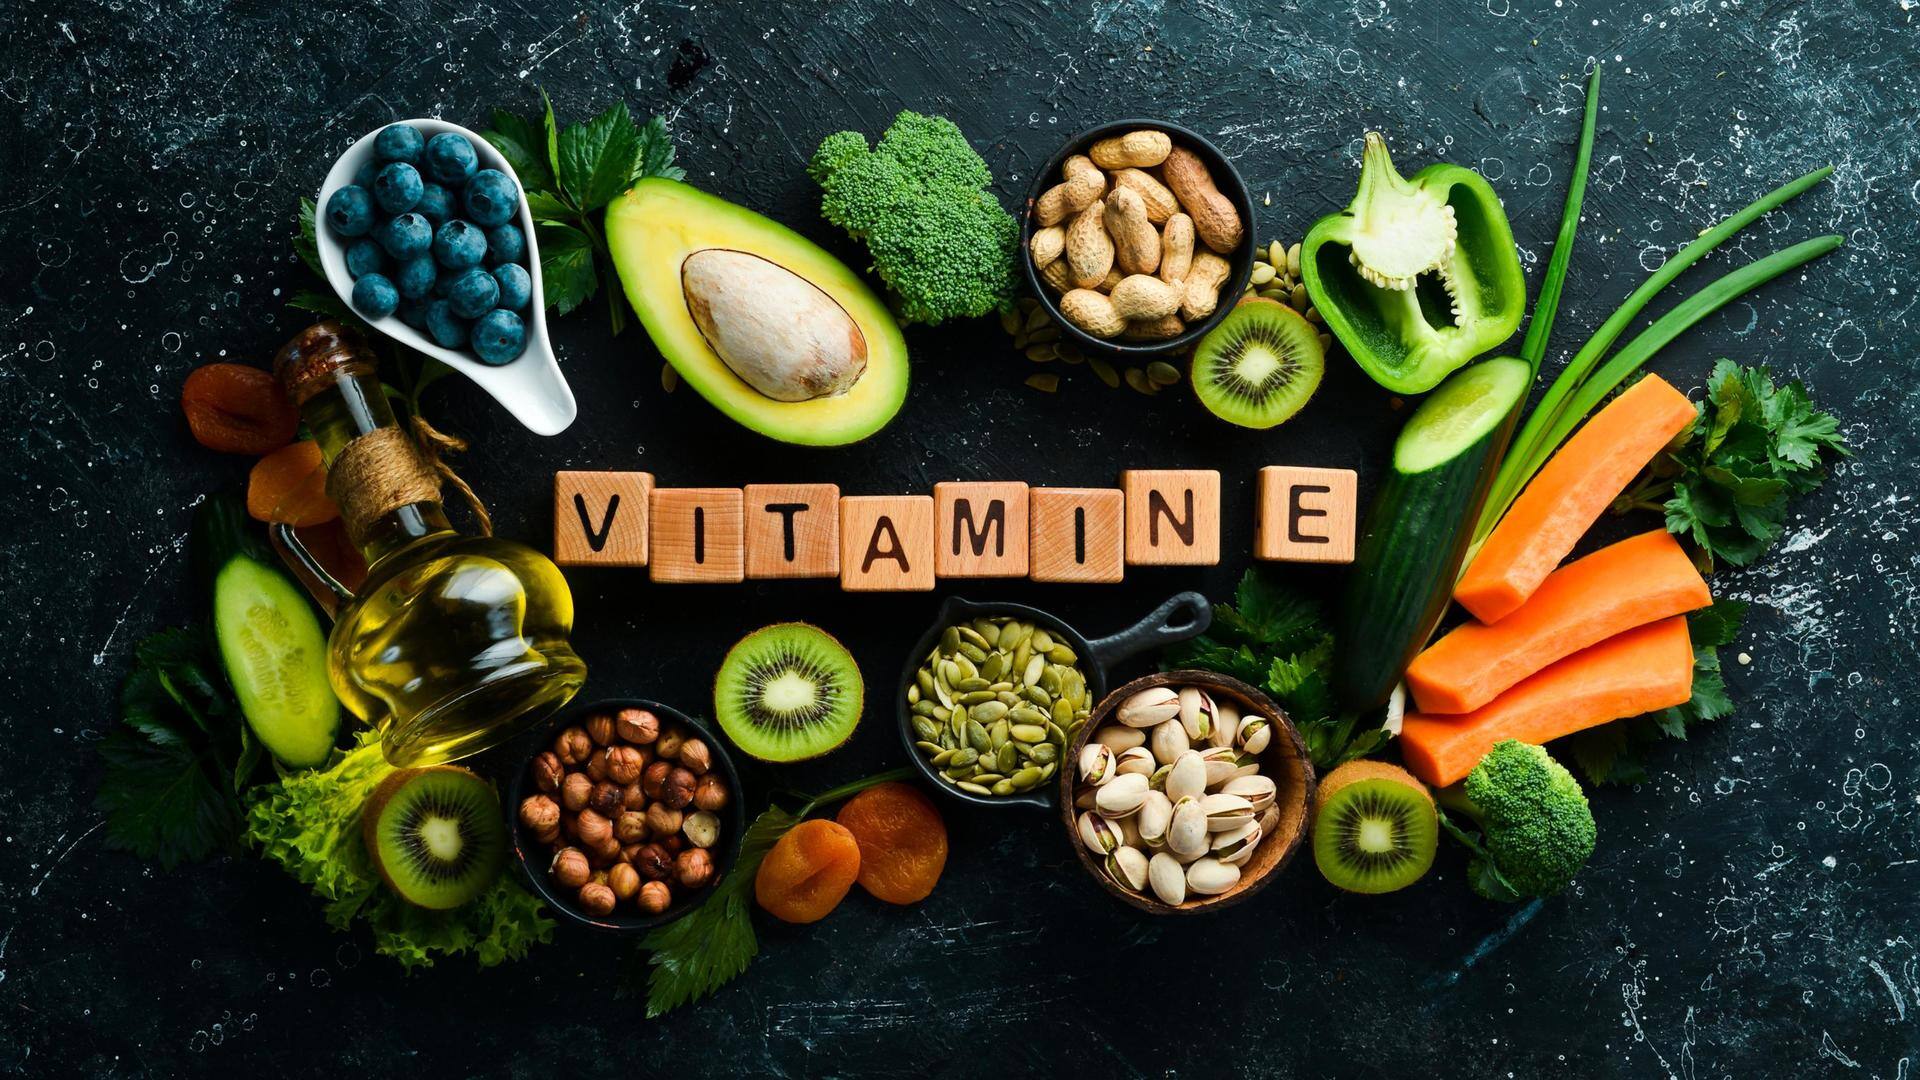 Vitamin E deficiency: Foods to stay healthy